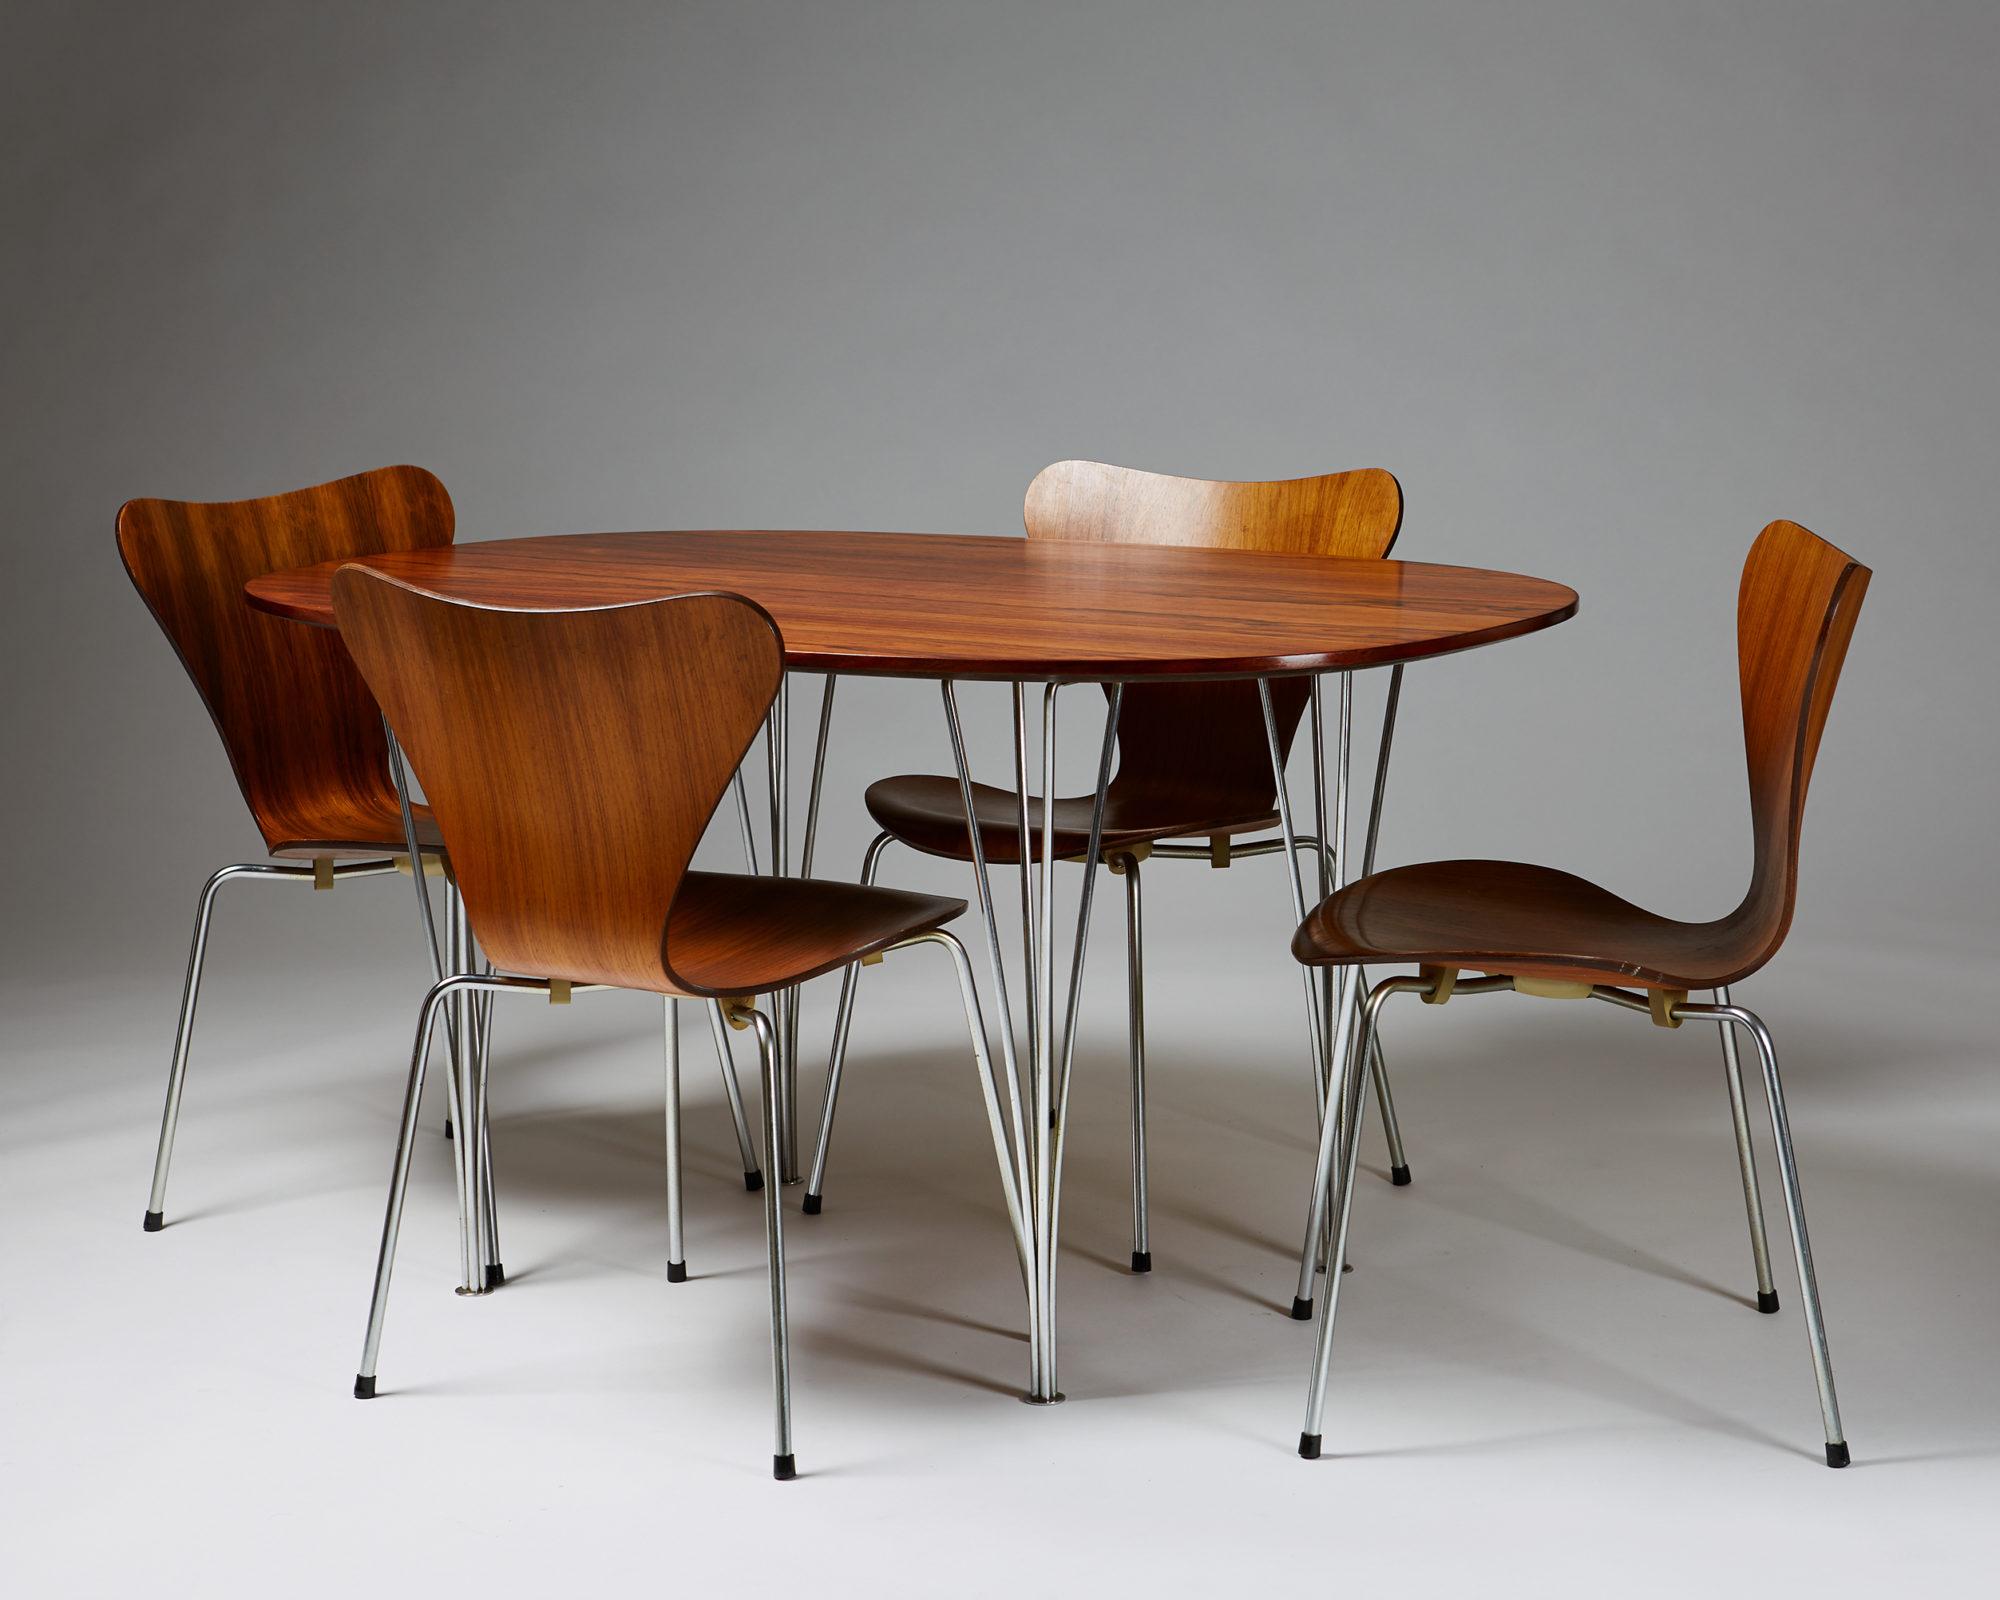 Dining set designed by Bruno Mathsson, Piet Hein and Arne Jacobsen for Fritz Hansen,
Denmark, 1950-1960s.

Rosewood and steel.

Table:
H: 70 cm / 2' 4''
L: 135 cm / 4' 5 1/2''
W: 90cm / 3'

Chairs:
H: 76 cm / 2' 6 1/4''
SH: 43 cm / 1' 4